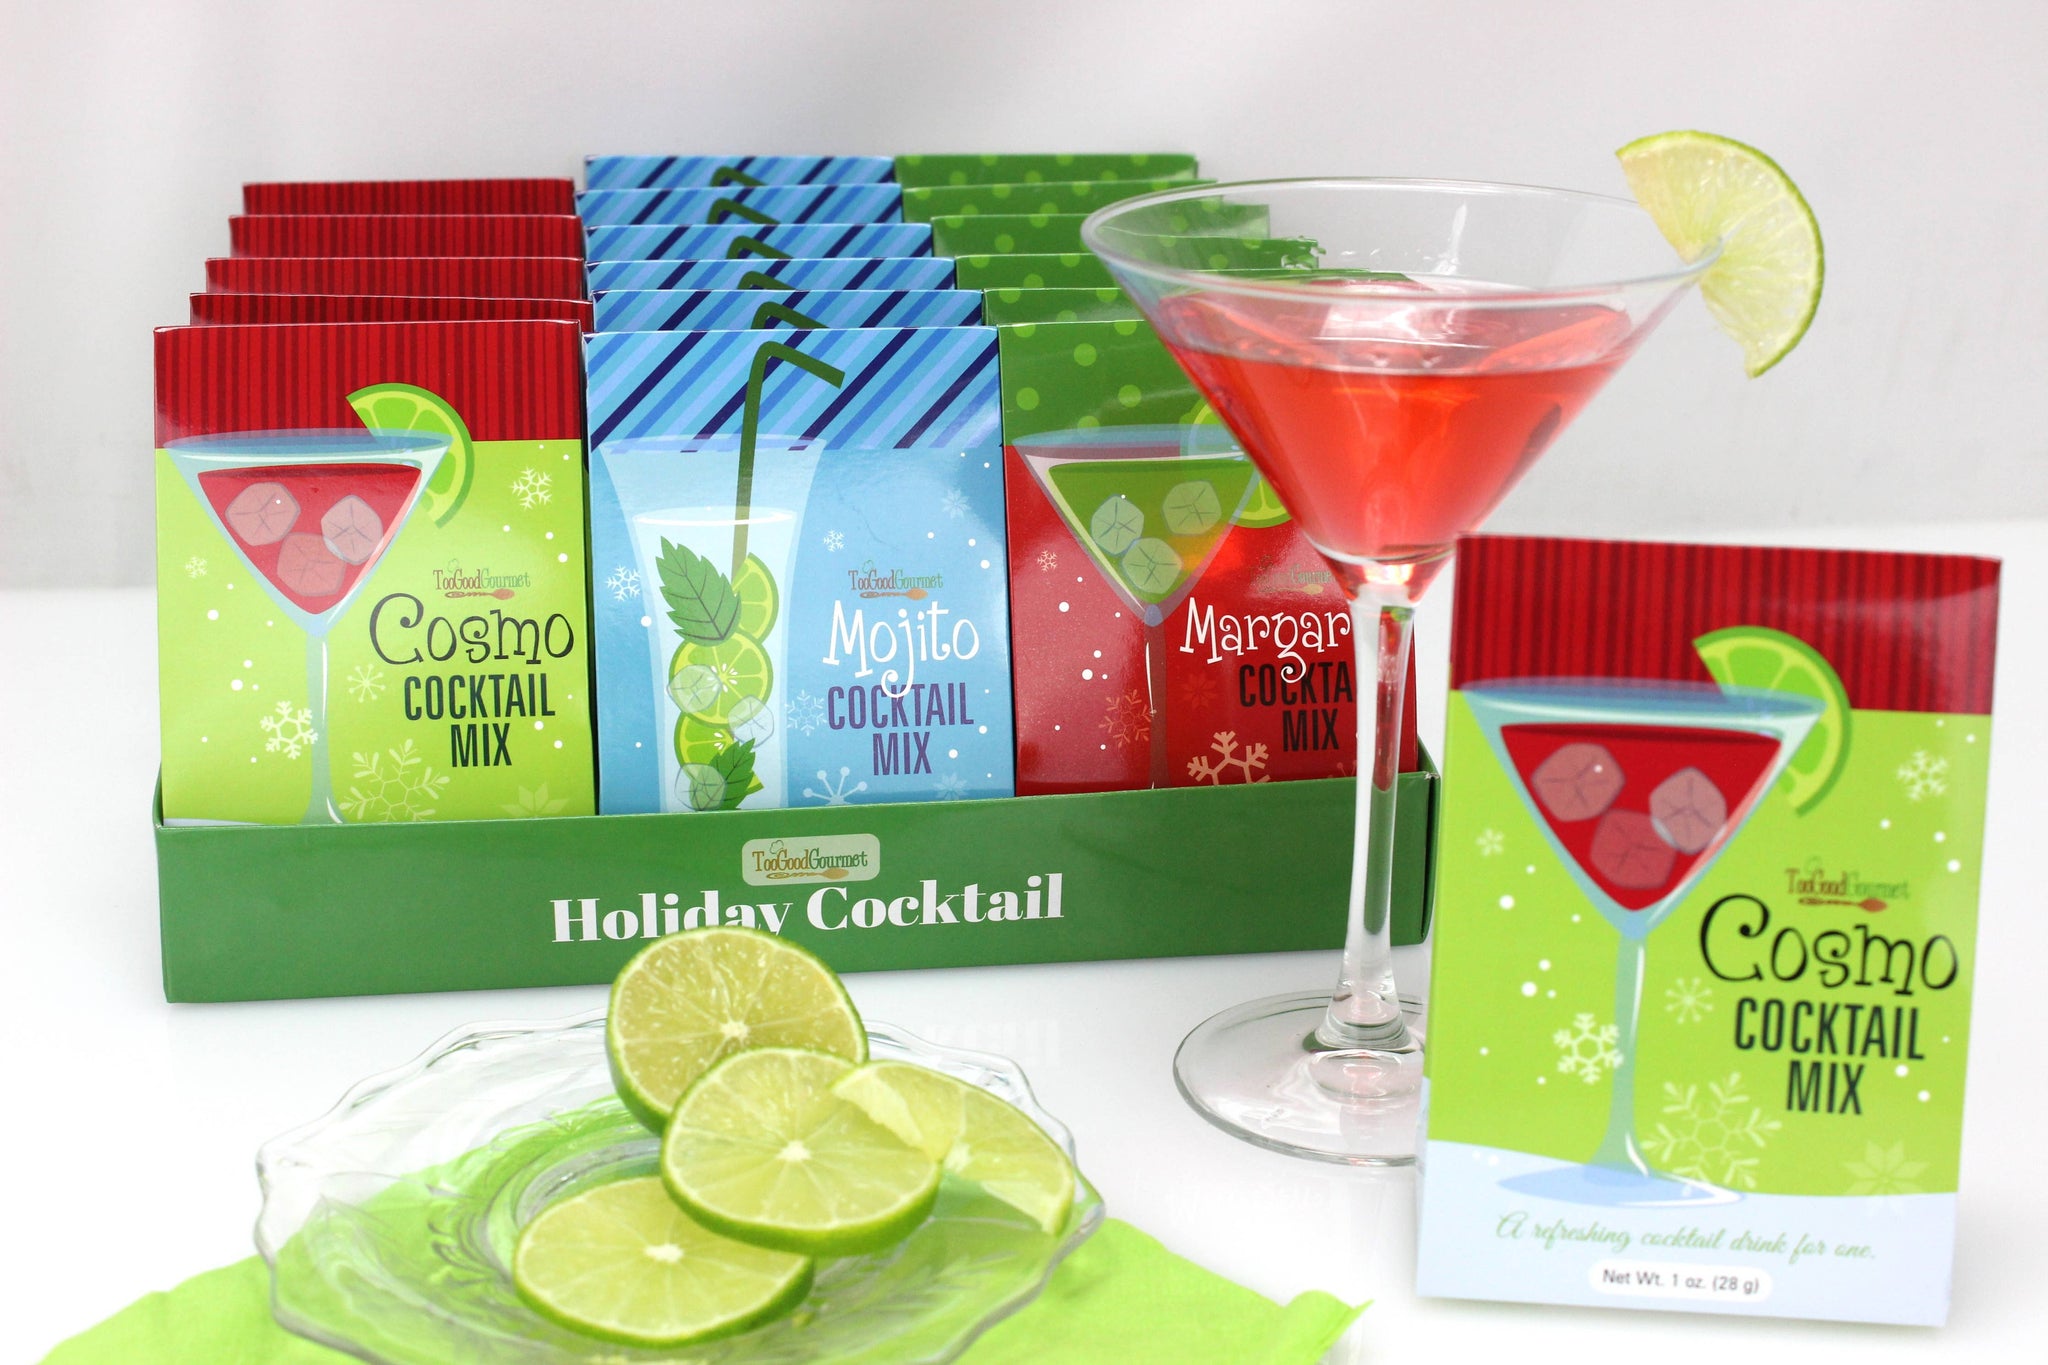 *Holiday Cocktails for One (1oz)